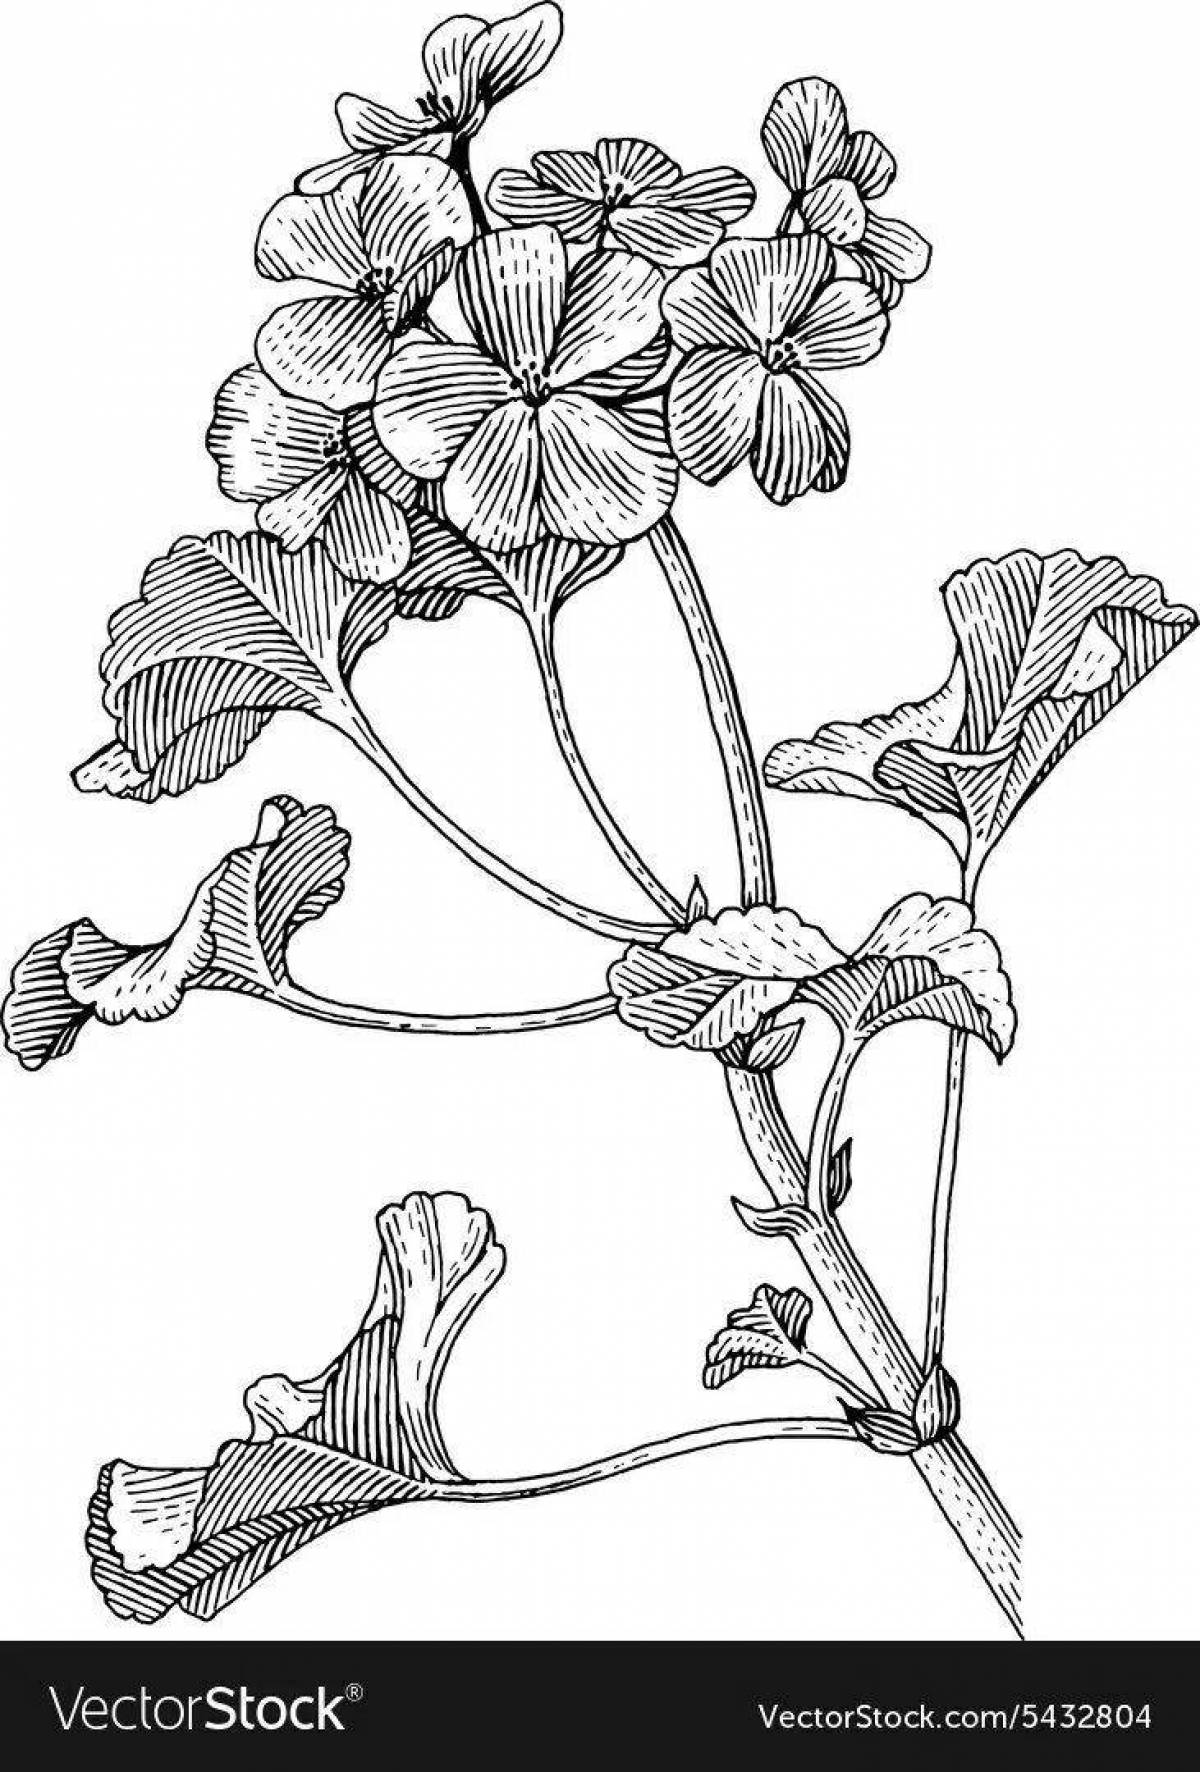 Amazing geranium coloring page for kids